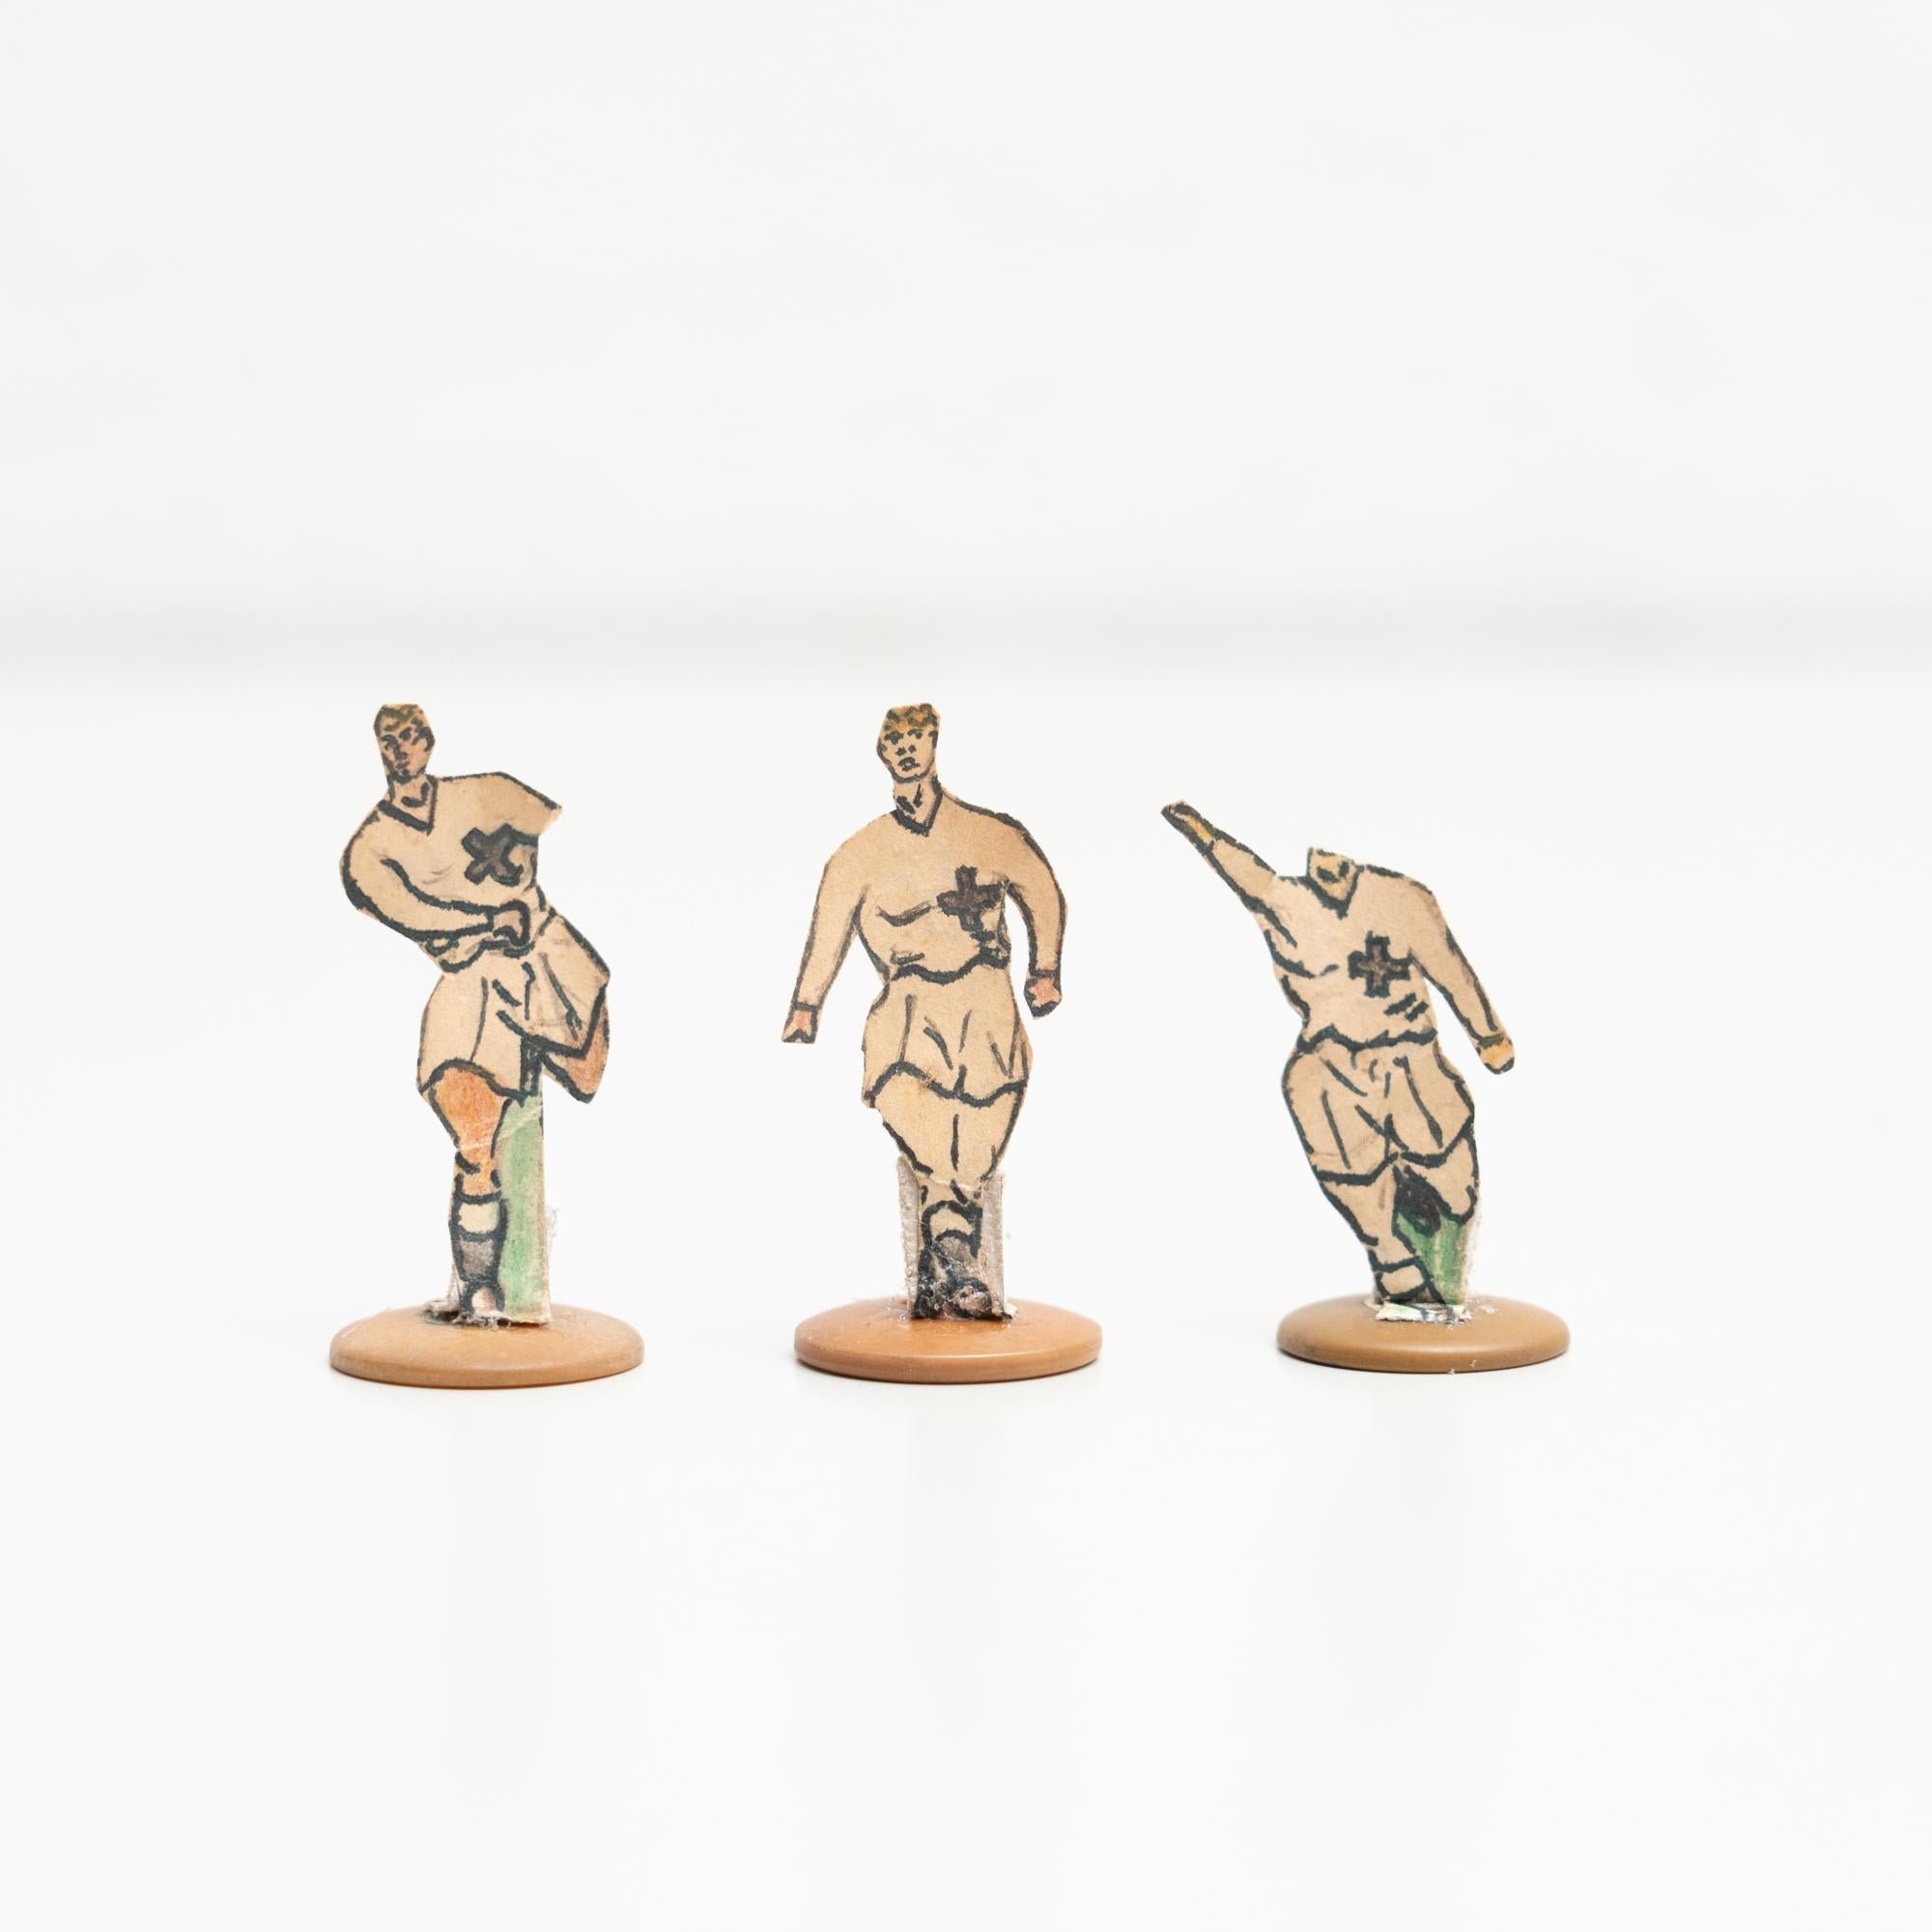 Set of three table button soccer game players. Traditional figures used to play this classic button Spanish game. 

The players are build buy attaching a printed photography or drawing of an actual football soccer player to a clothing button.